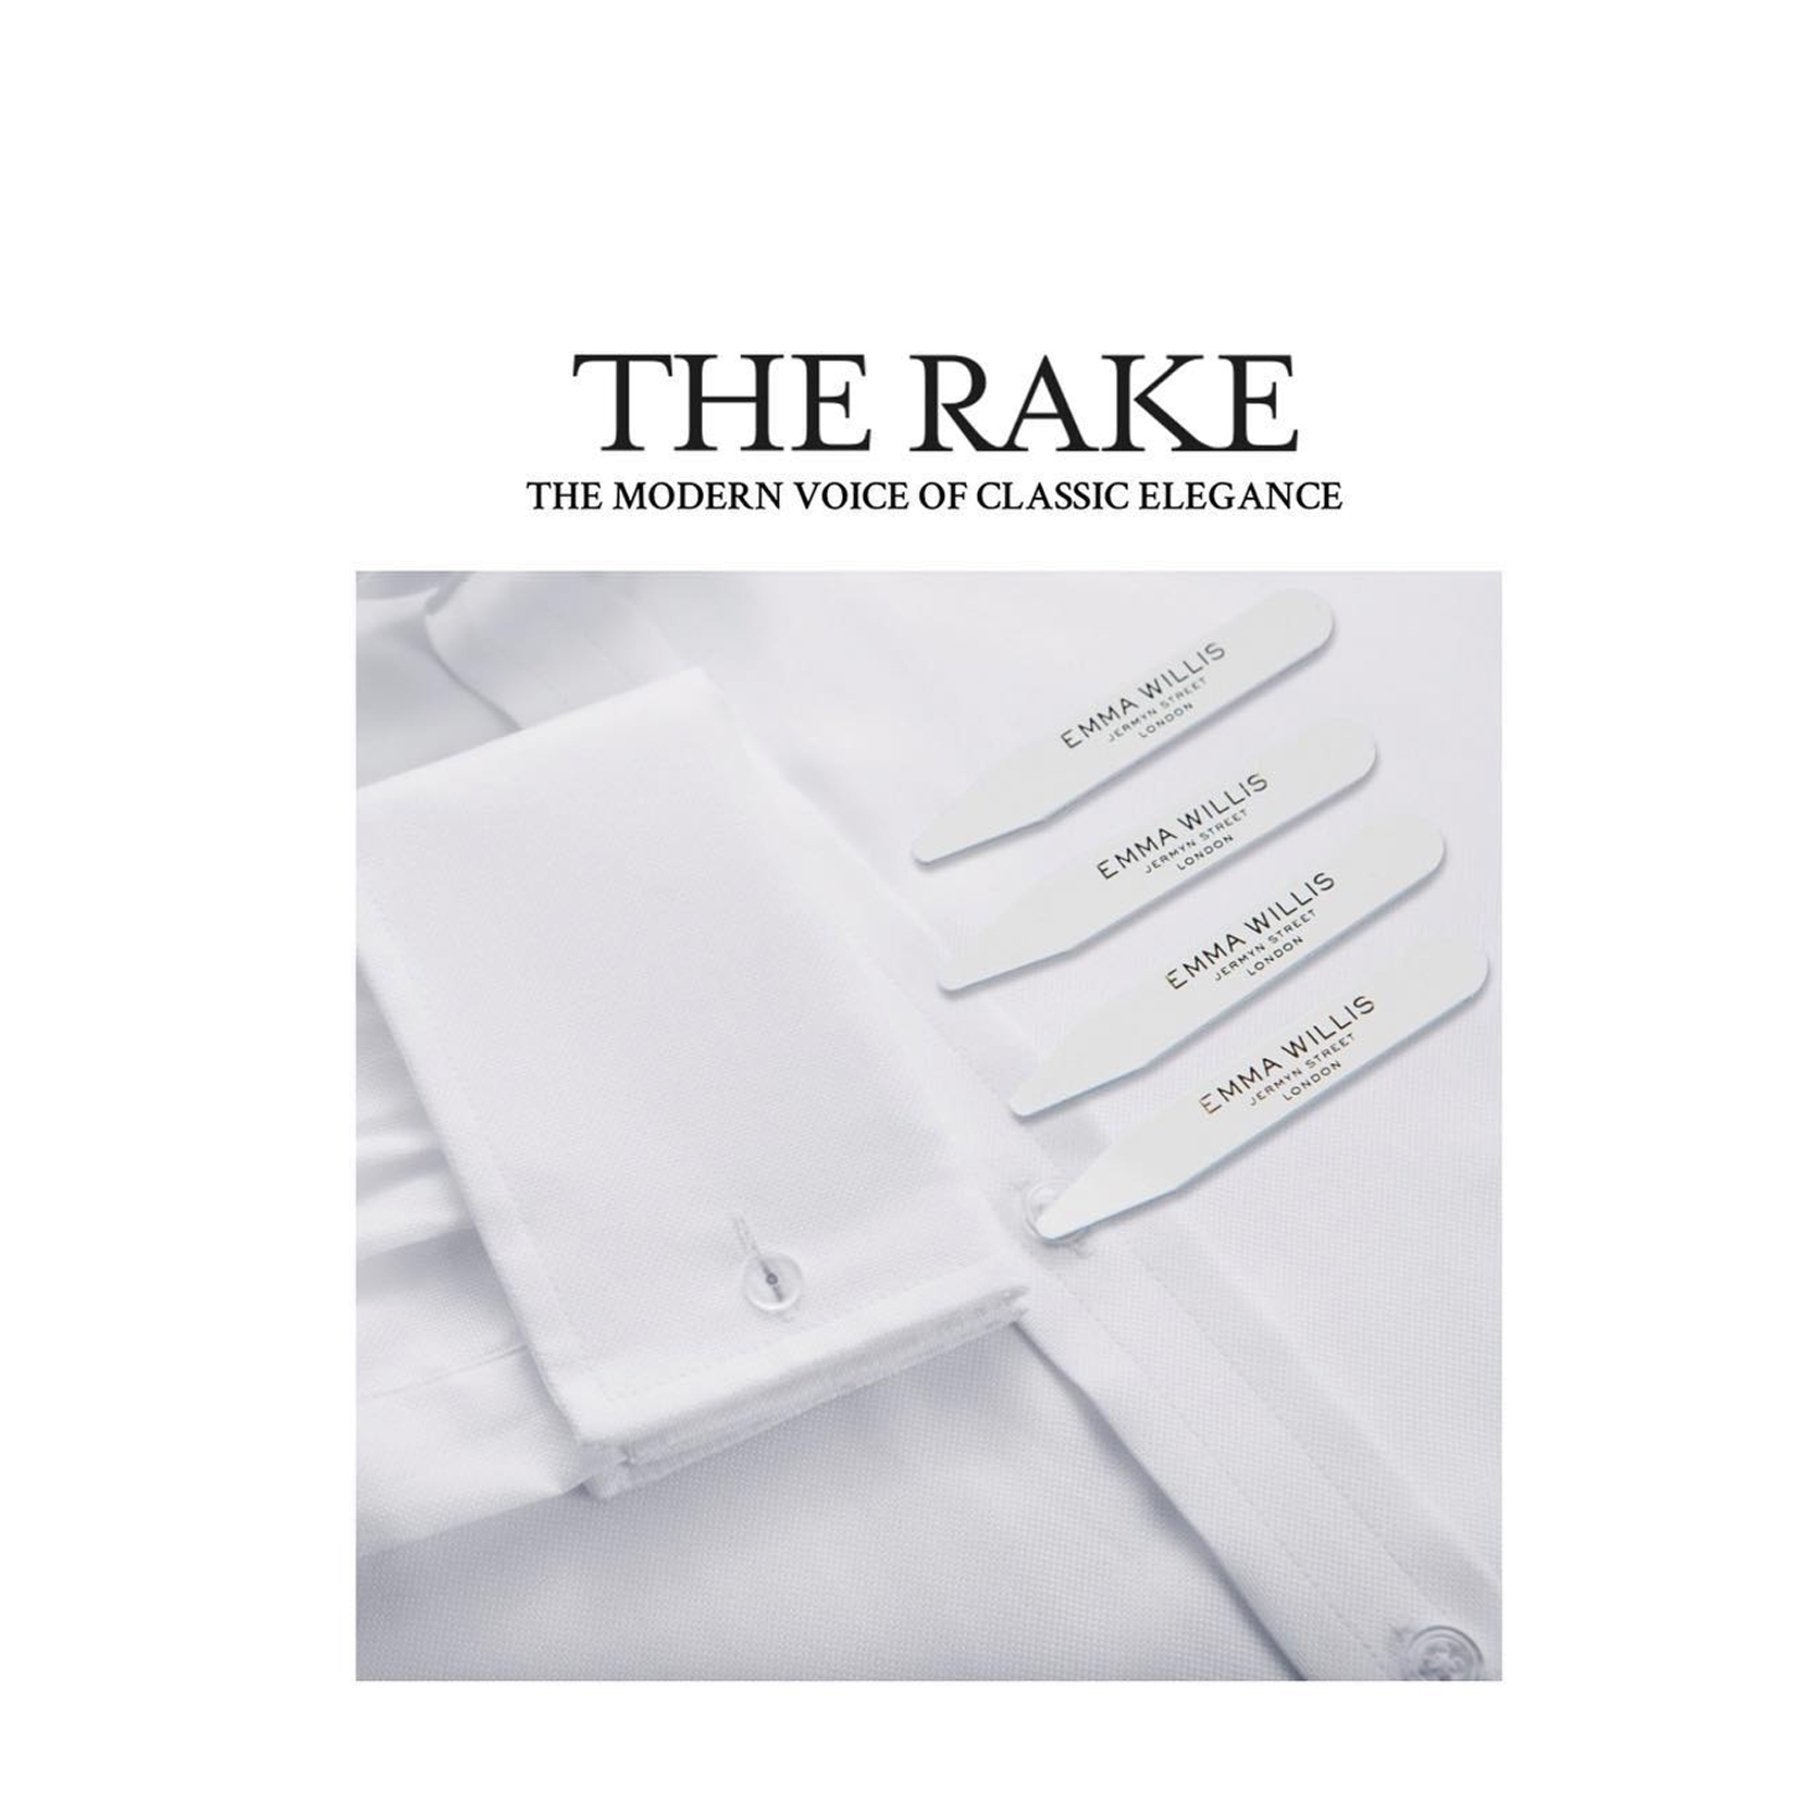 We are pleased to announce that we have collaborated with The Rake and launched an exclusive collection online - Emma Willis